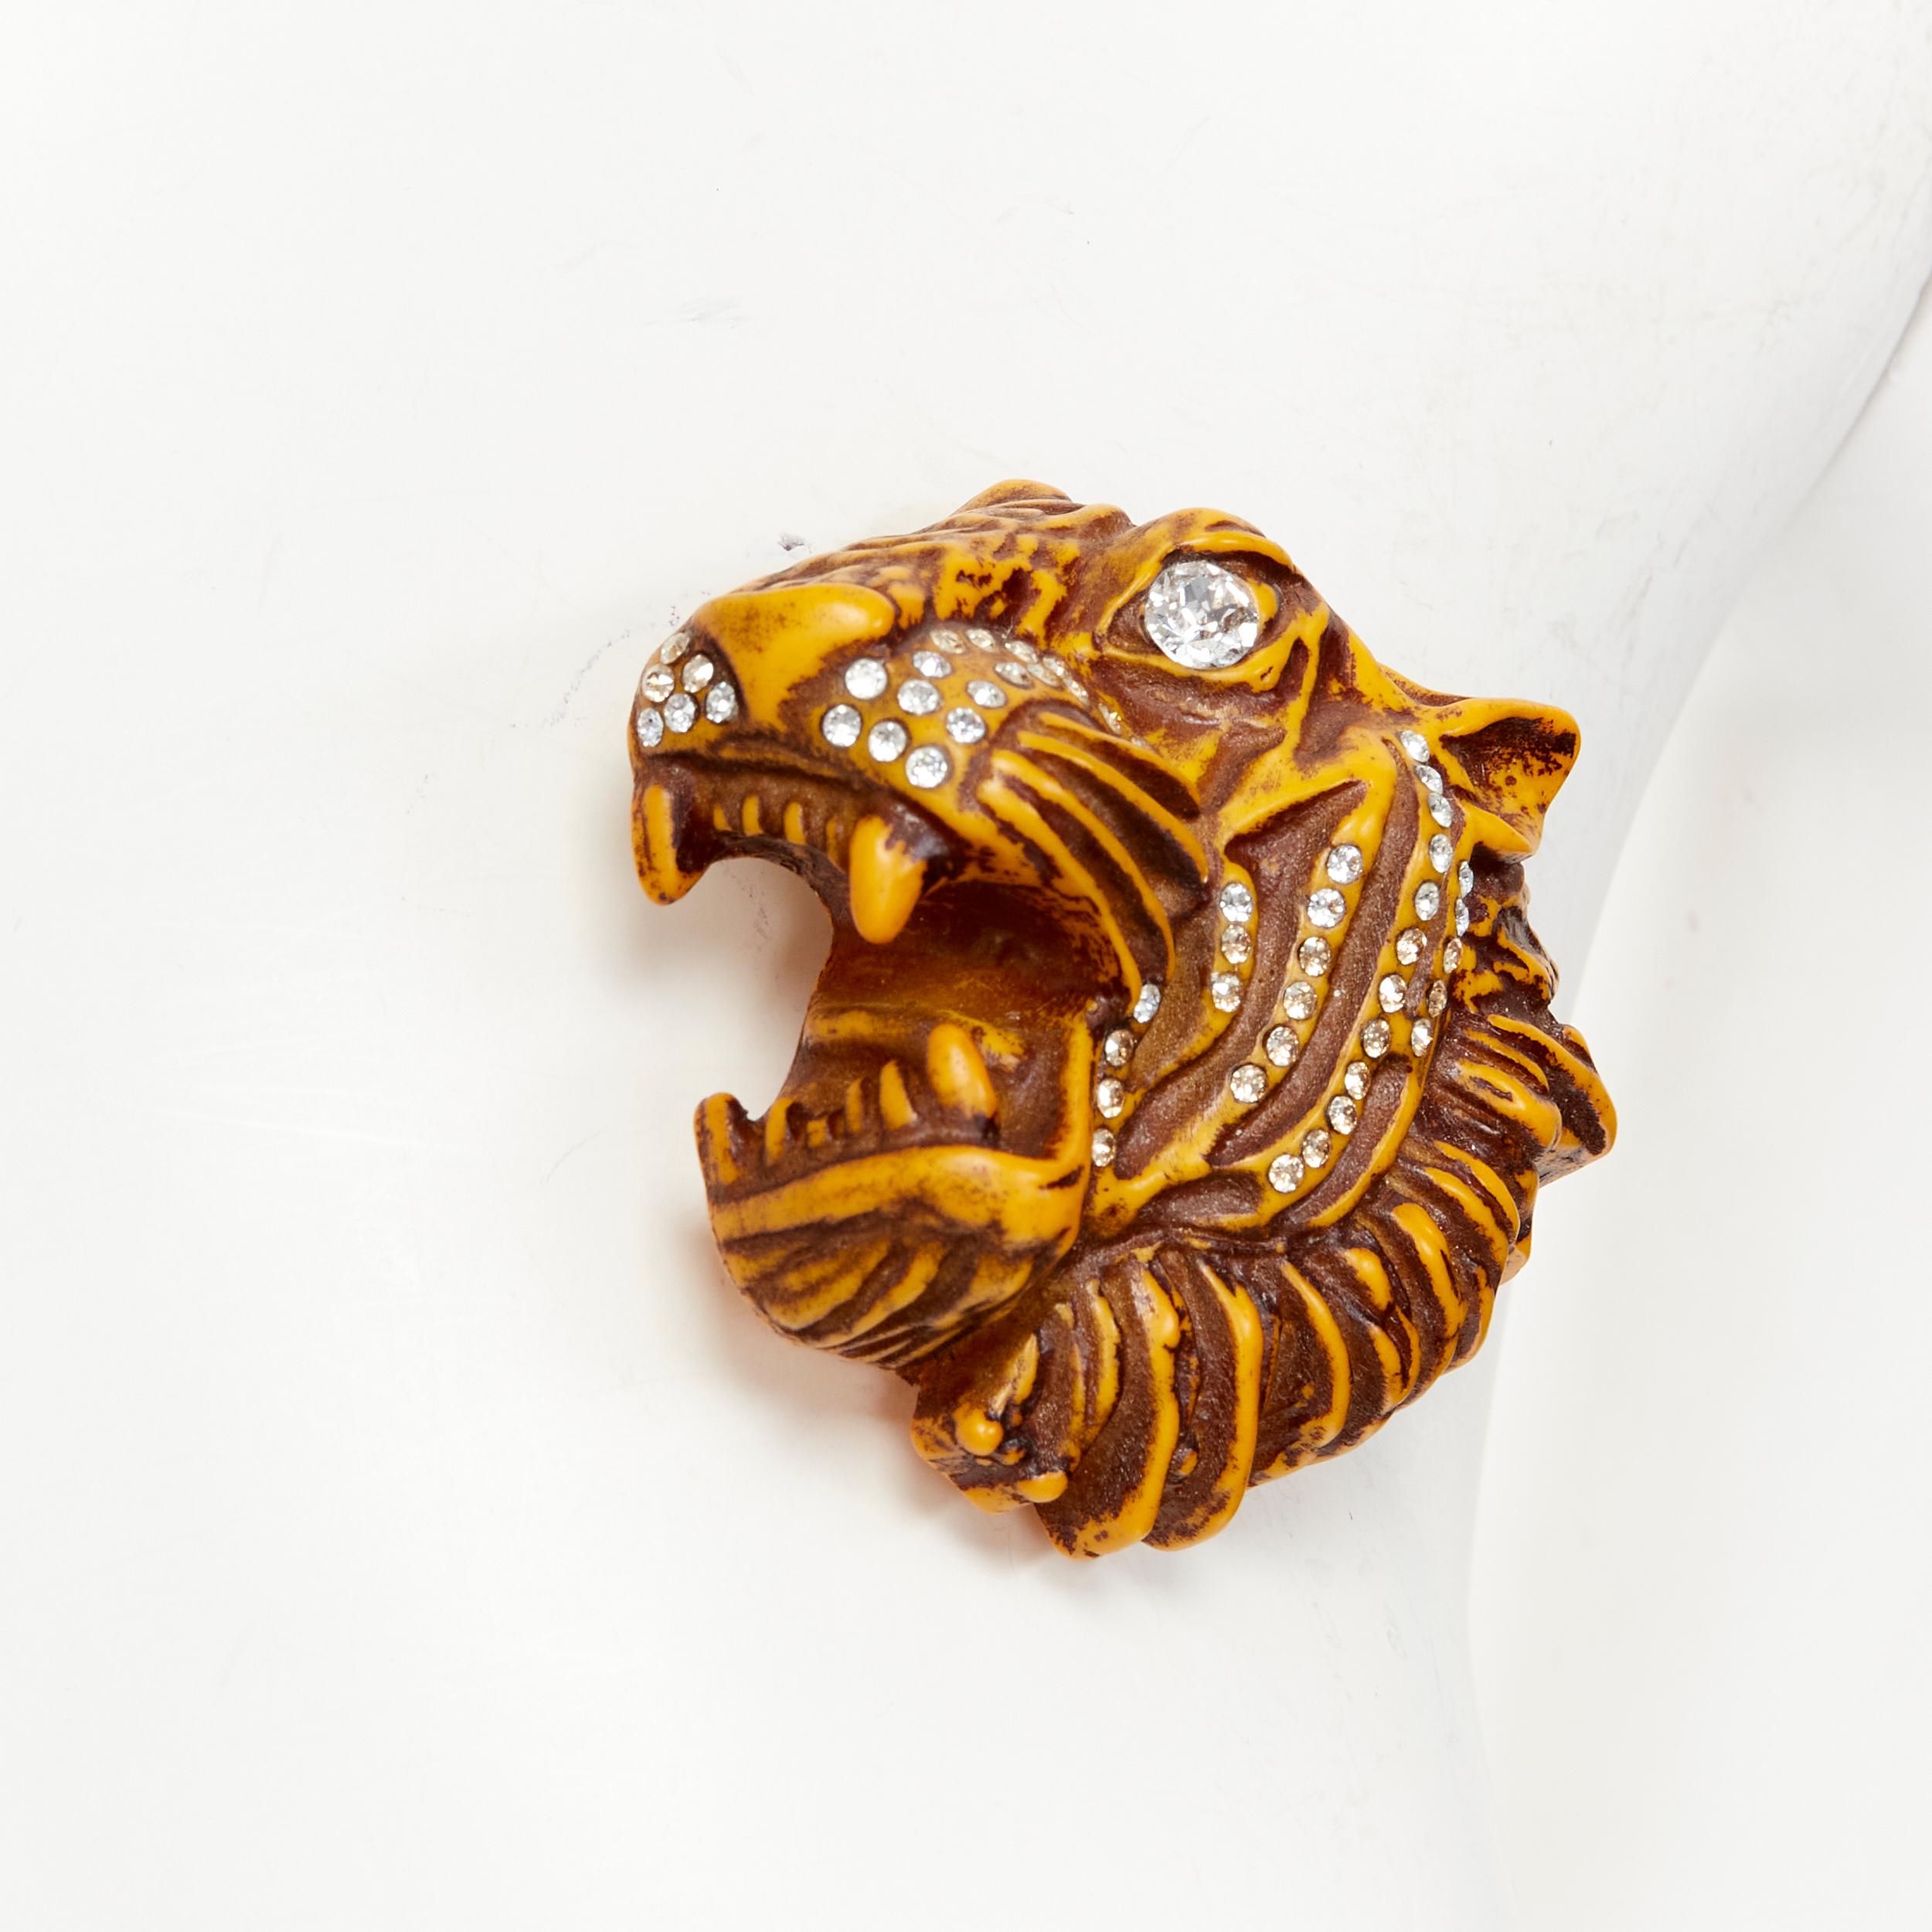 new GUCCI Alessandro Michele brown wood crystal embellished Tiger pin brooch
Reference: TGAS/C01642
Brand: Gucci
Designer: Alessandro Michele
Material: Wood
Color: Brown
Pattern: Solid
Closure: Pin
Made in: Italy

CONDITION:
Condition: New without